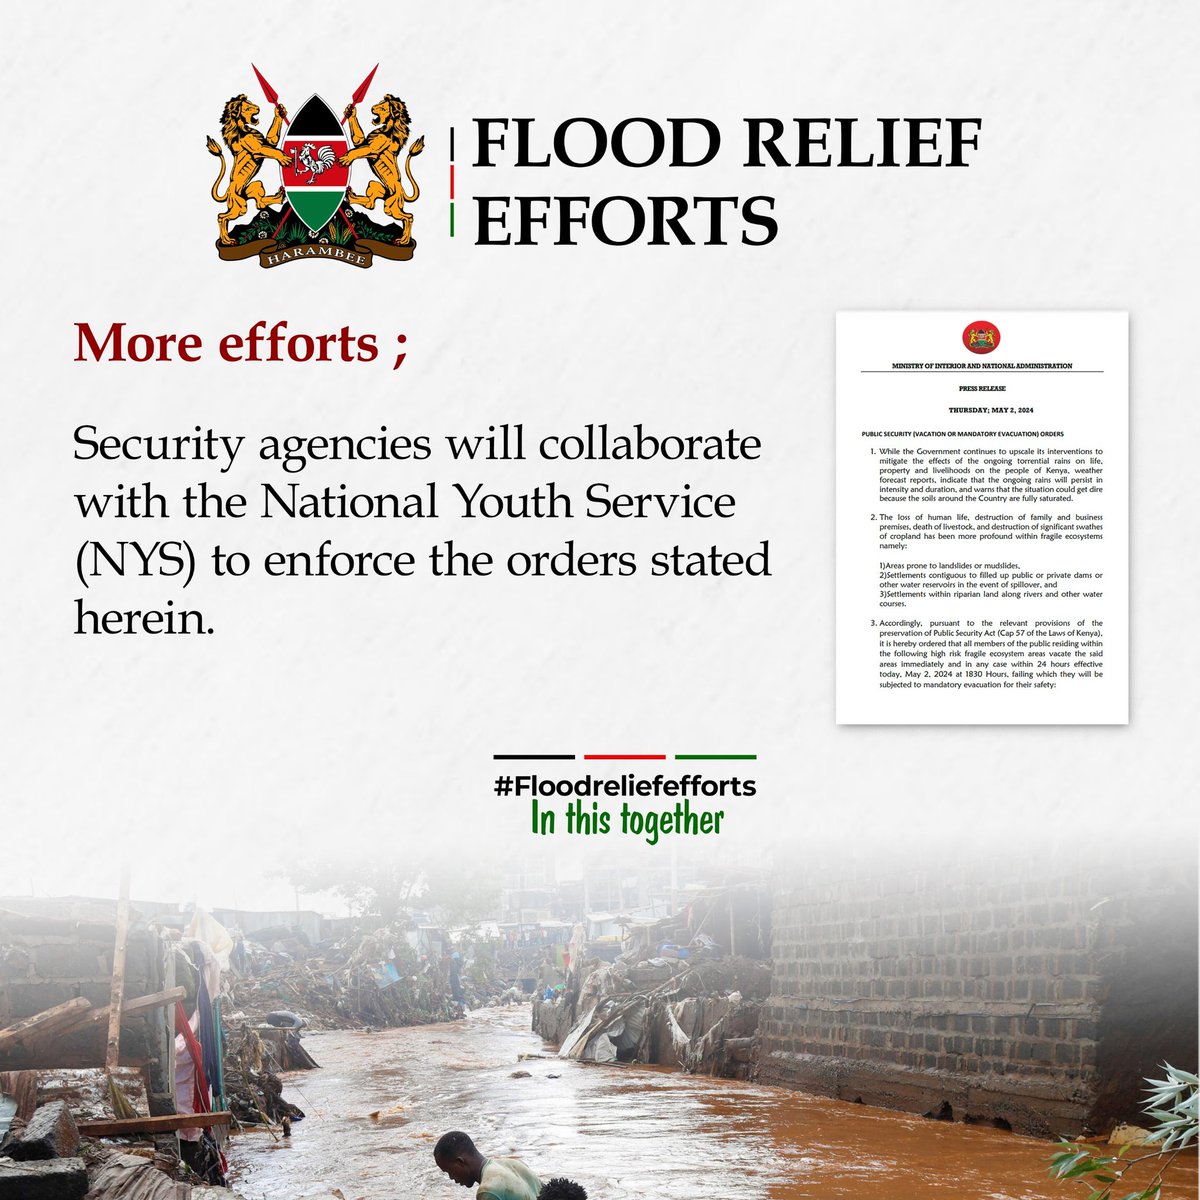 The positive response to Cabinet directives on riparian reserve relocation signifies a shared commitment to prioritizing citizen safety and environmental sustainability. Let's continue to work hand in hand to address the root causes of flooding and ensure the well-being of all…